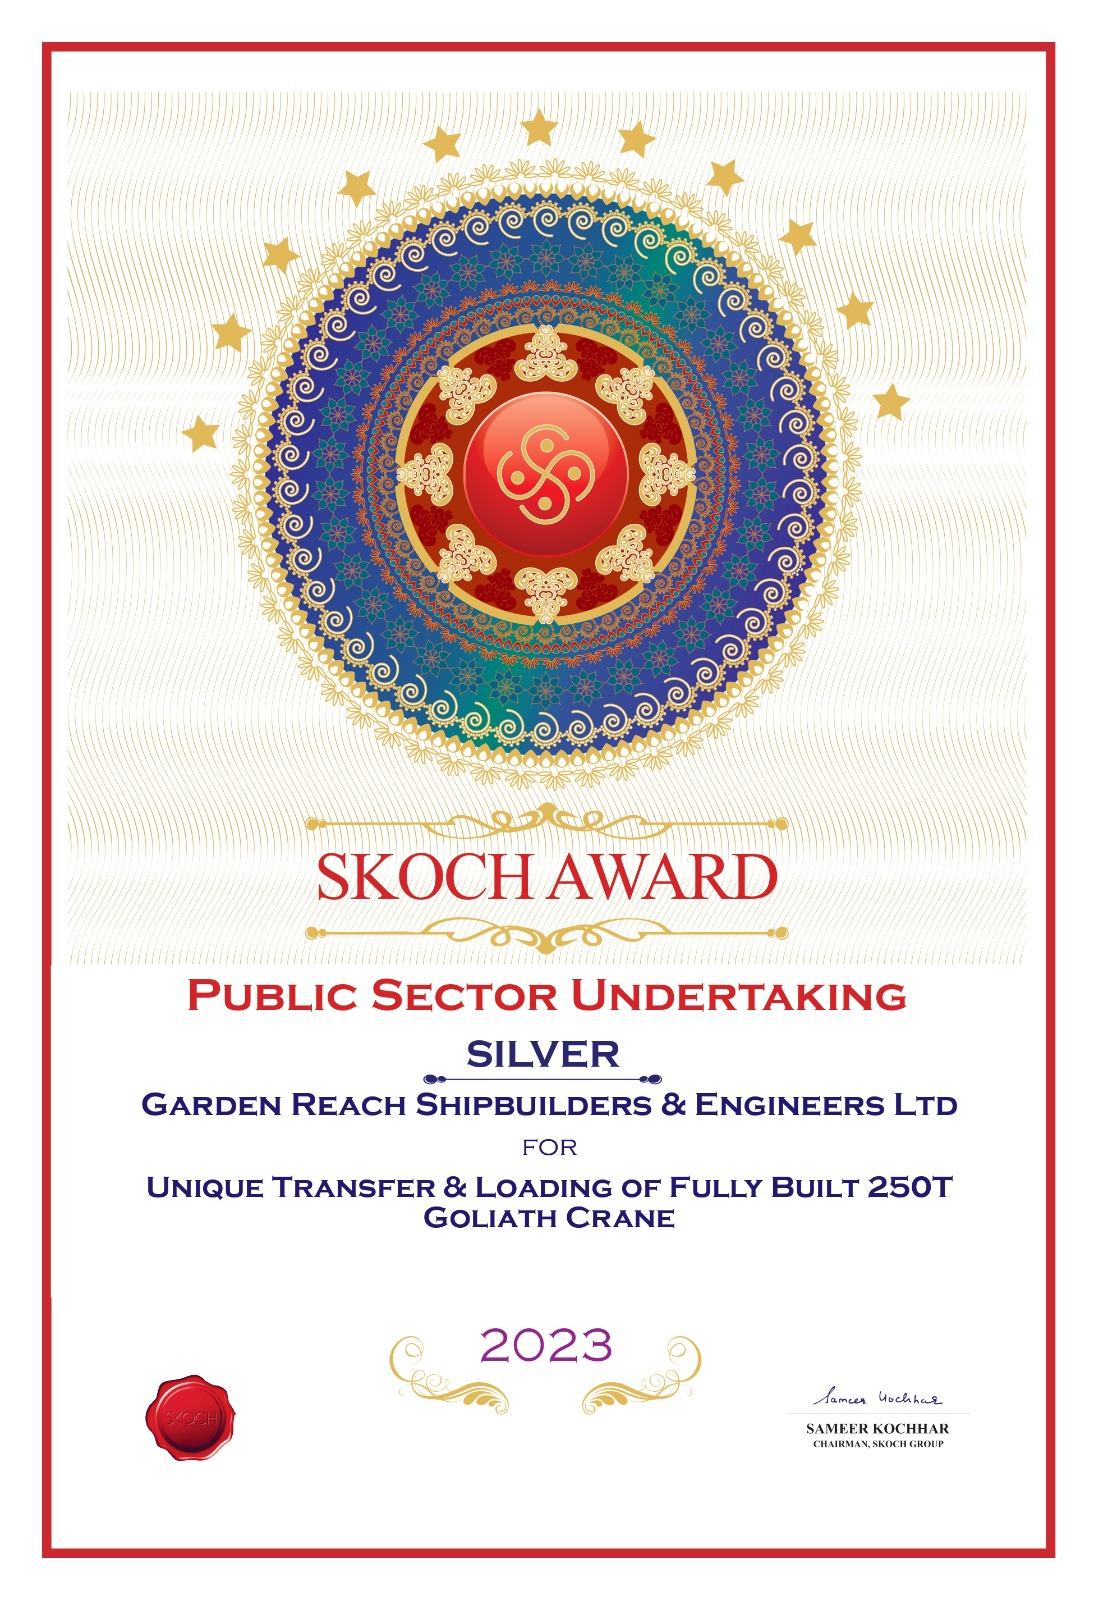 GRSE received prestigious 91st SKOCH Awards for the project “Unique Transfer & Loading of fully built 250T Goliath Crane” on 04 May 23